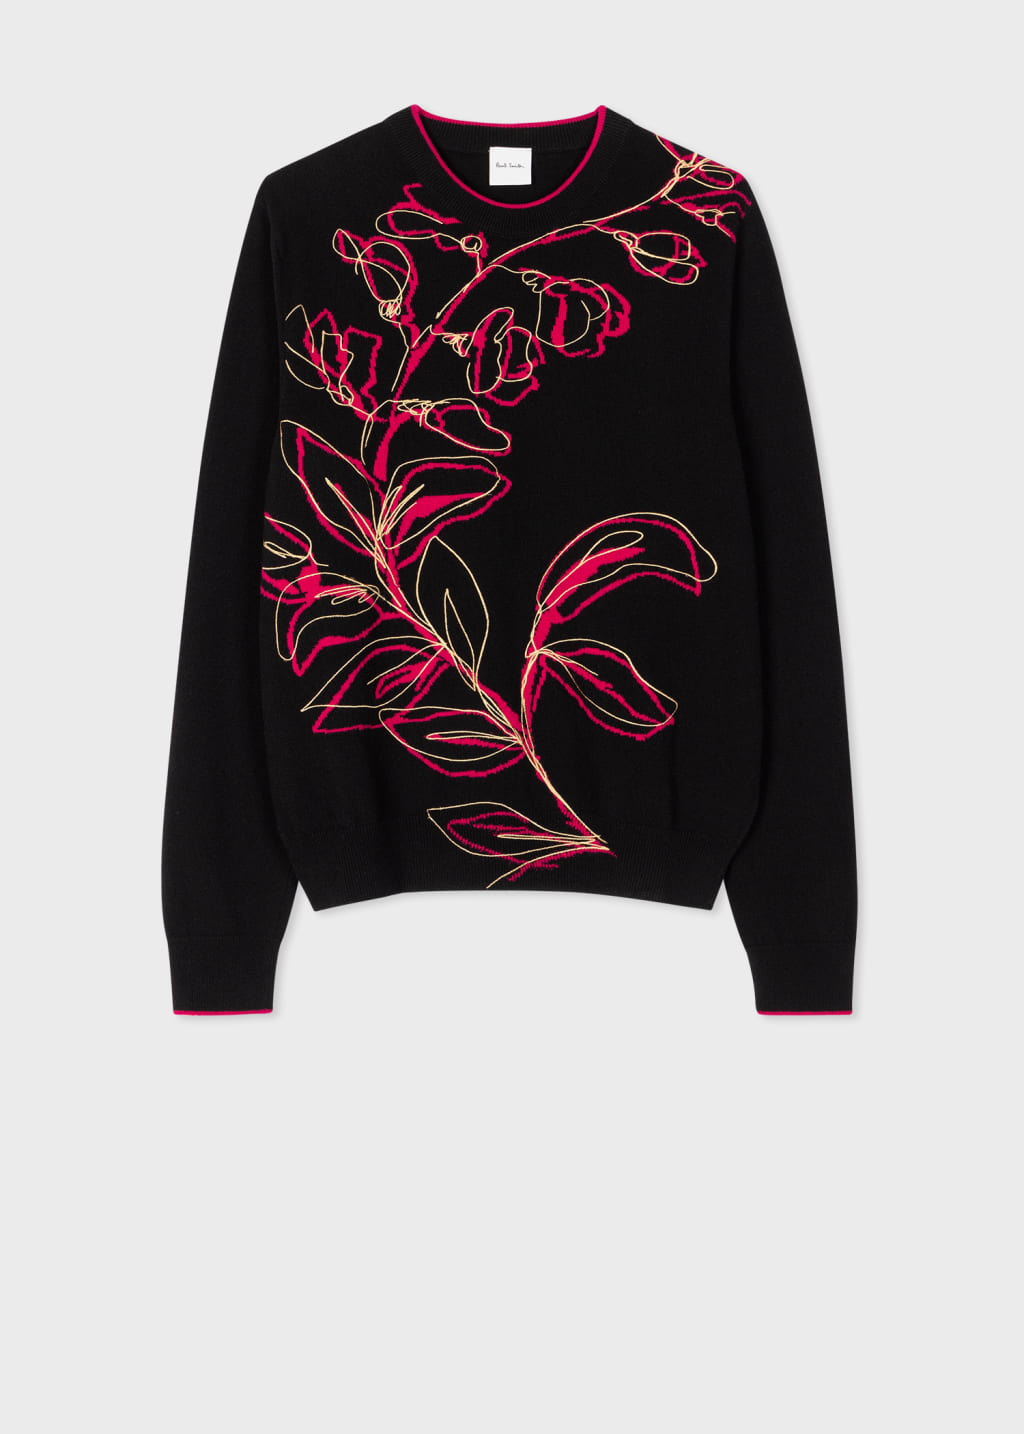 Front View - Women's Black 'Ink Floral' Lambswool Sweater Paul Smith